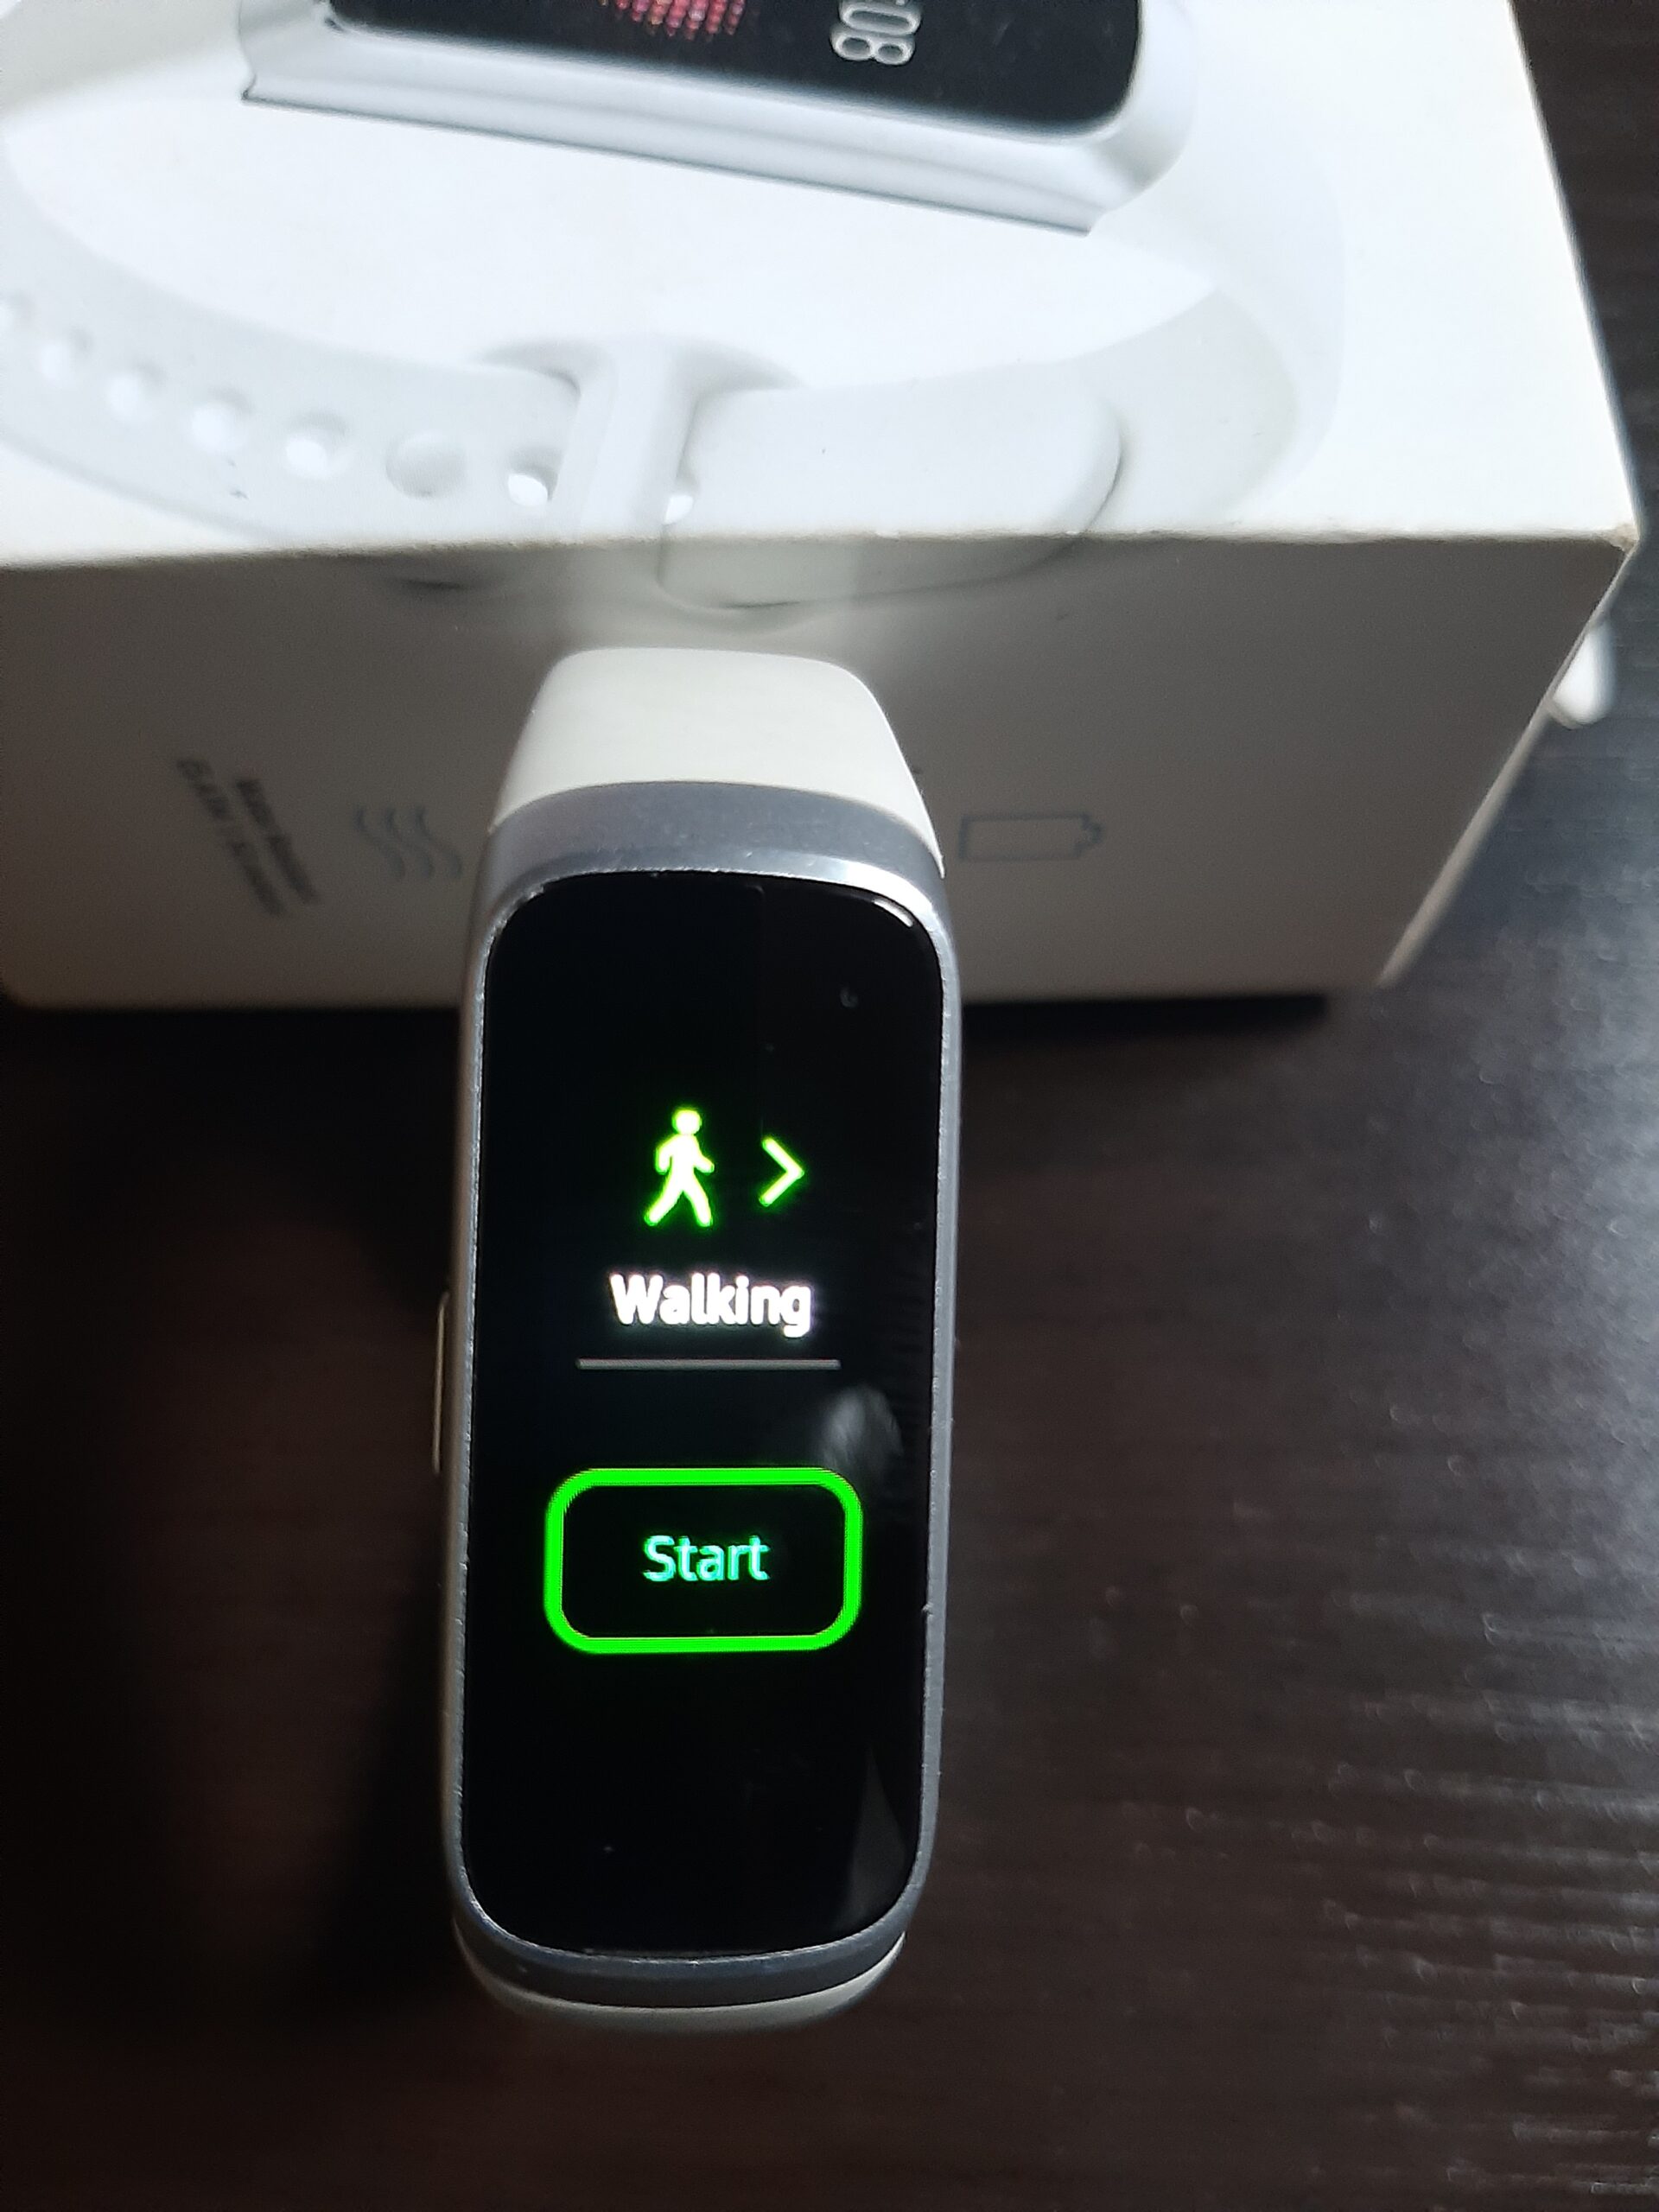 Hands On: Samsung Galaxy Fit In-depth Review – 6 Weeks After